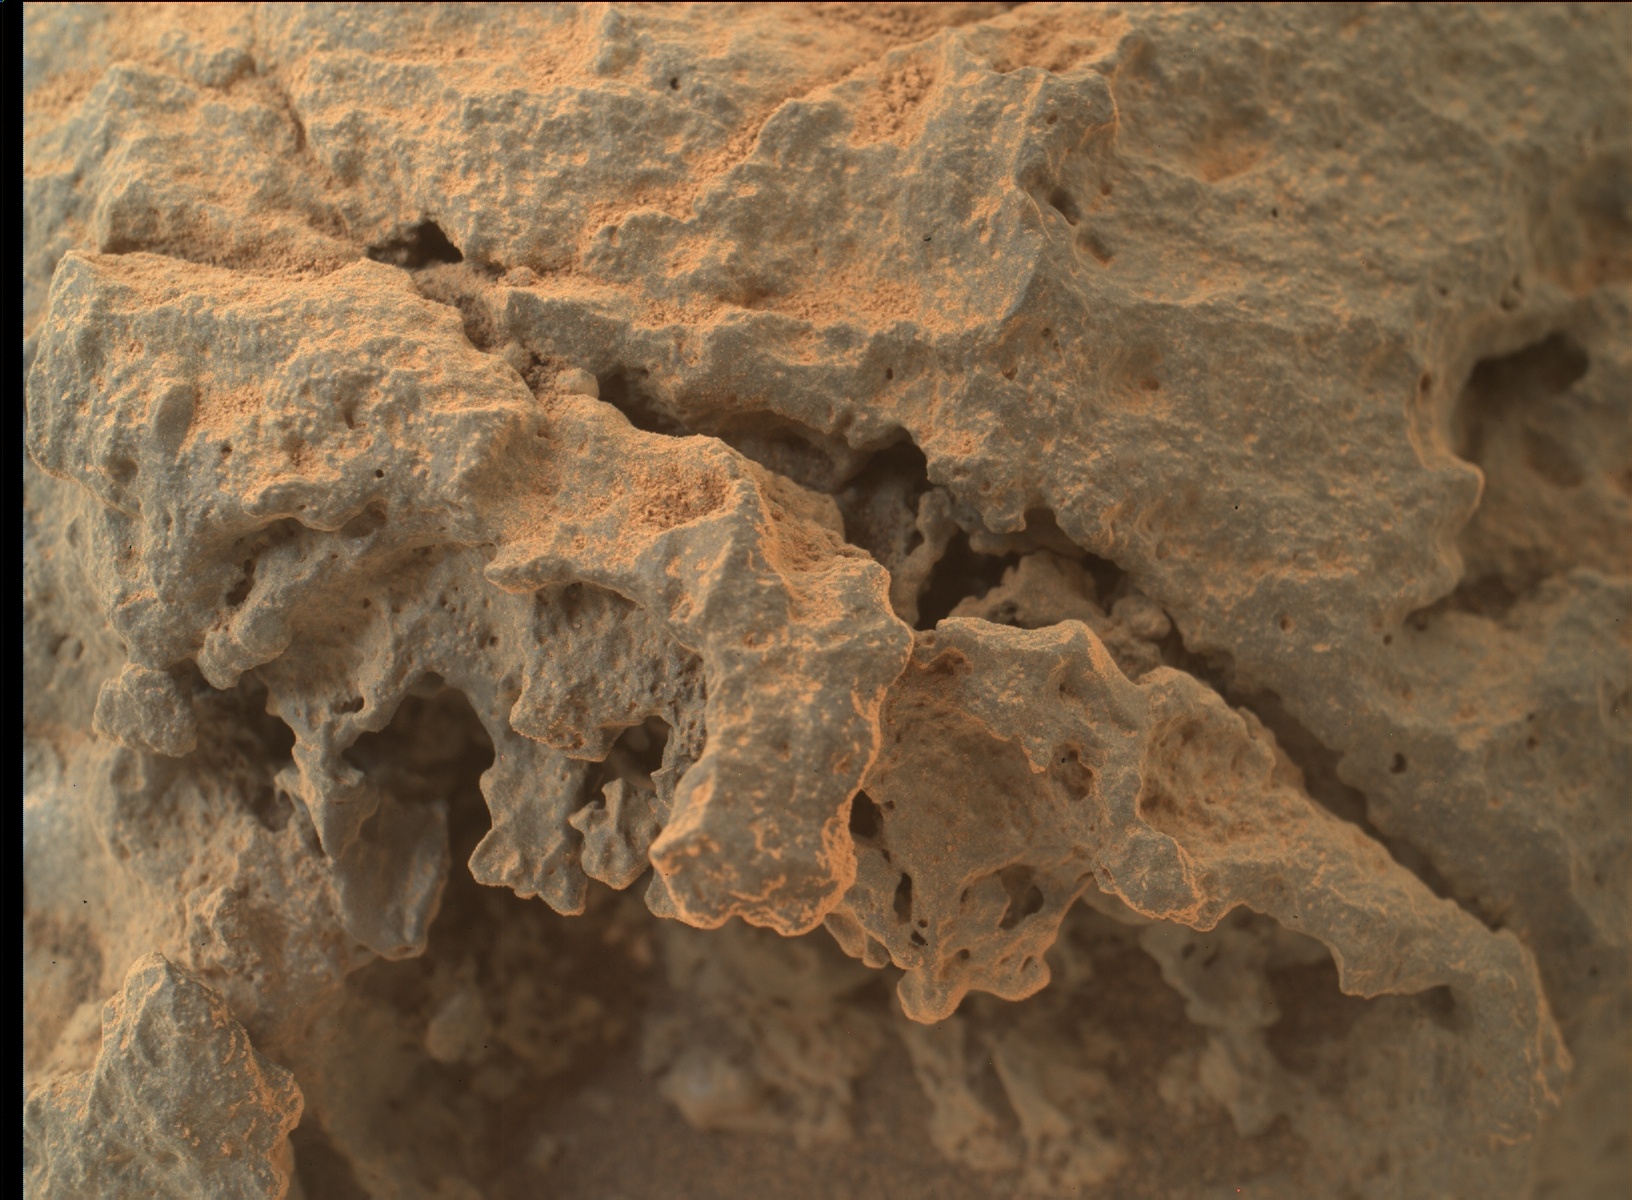 Nasa's Mars rover Curiosity acquired this image using its Mars Hand Lens Imager (MAHLI) on Sol 304